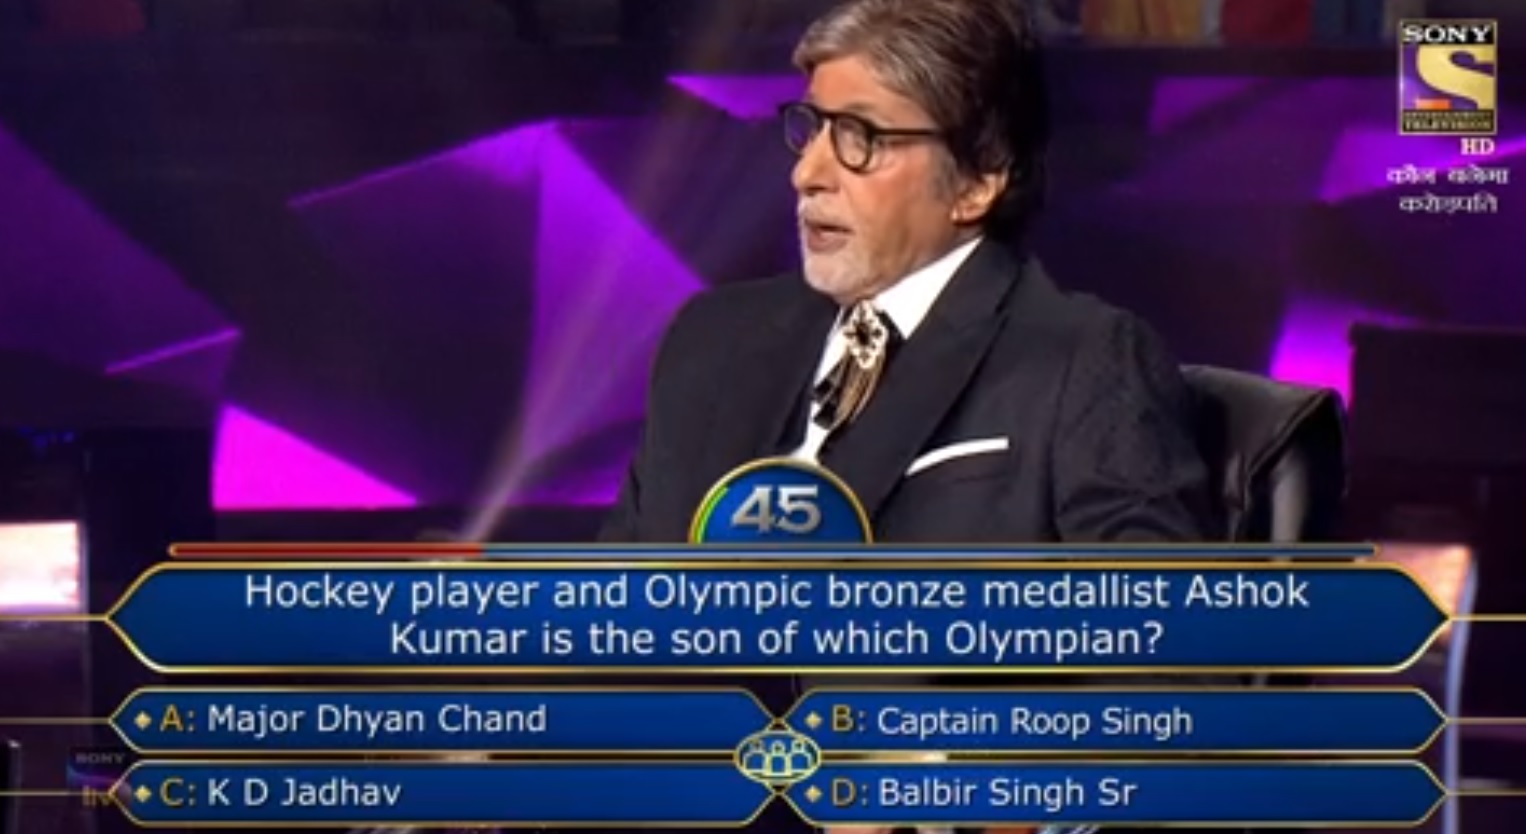 Ques : Hockey player and Olympic bronze medalist Ashok Kumar is the son of which Olympian?